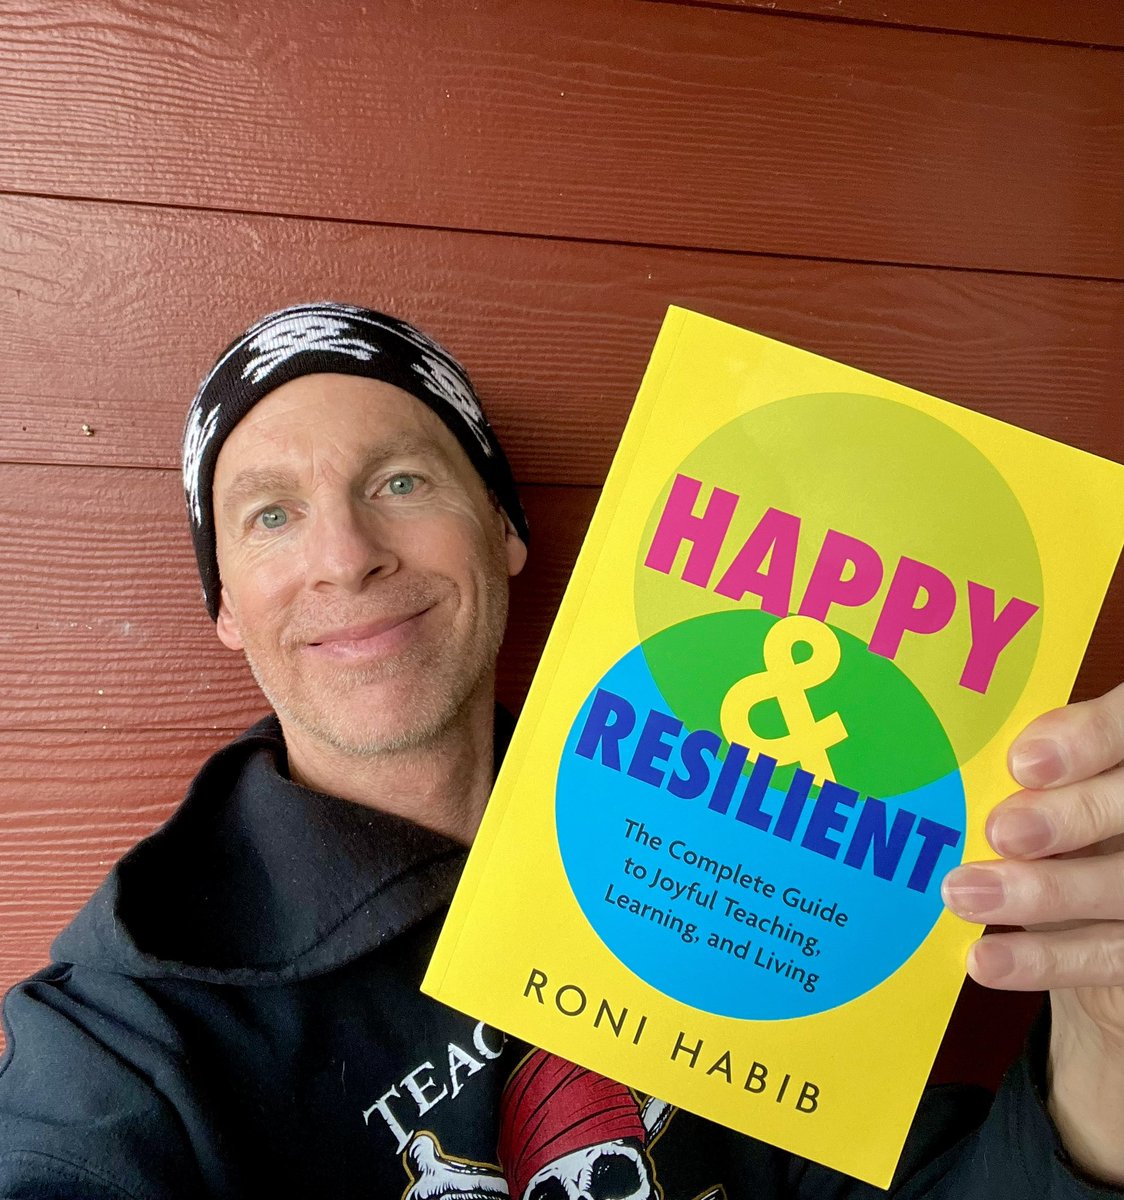 Wonderful message for a time when teachers everywhere are feeling overwhelmed… #HappyAndResilient by @Roni_Habib The Complete Guide to Joyful Teaching, Learning, & Living a.co/d/jguNSn6 #dbcincbooks #tlap #leadlap